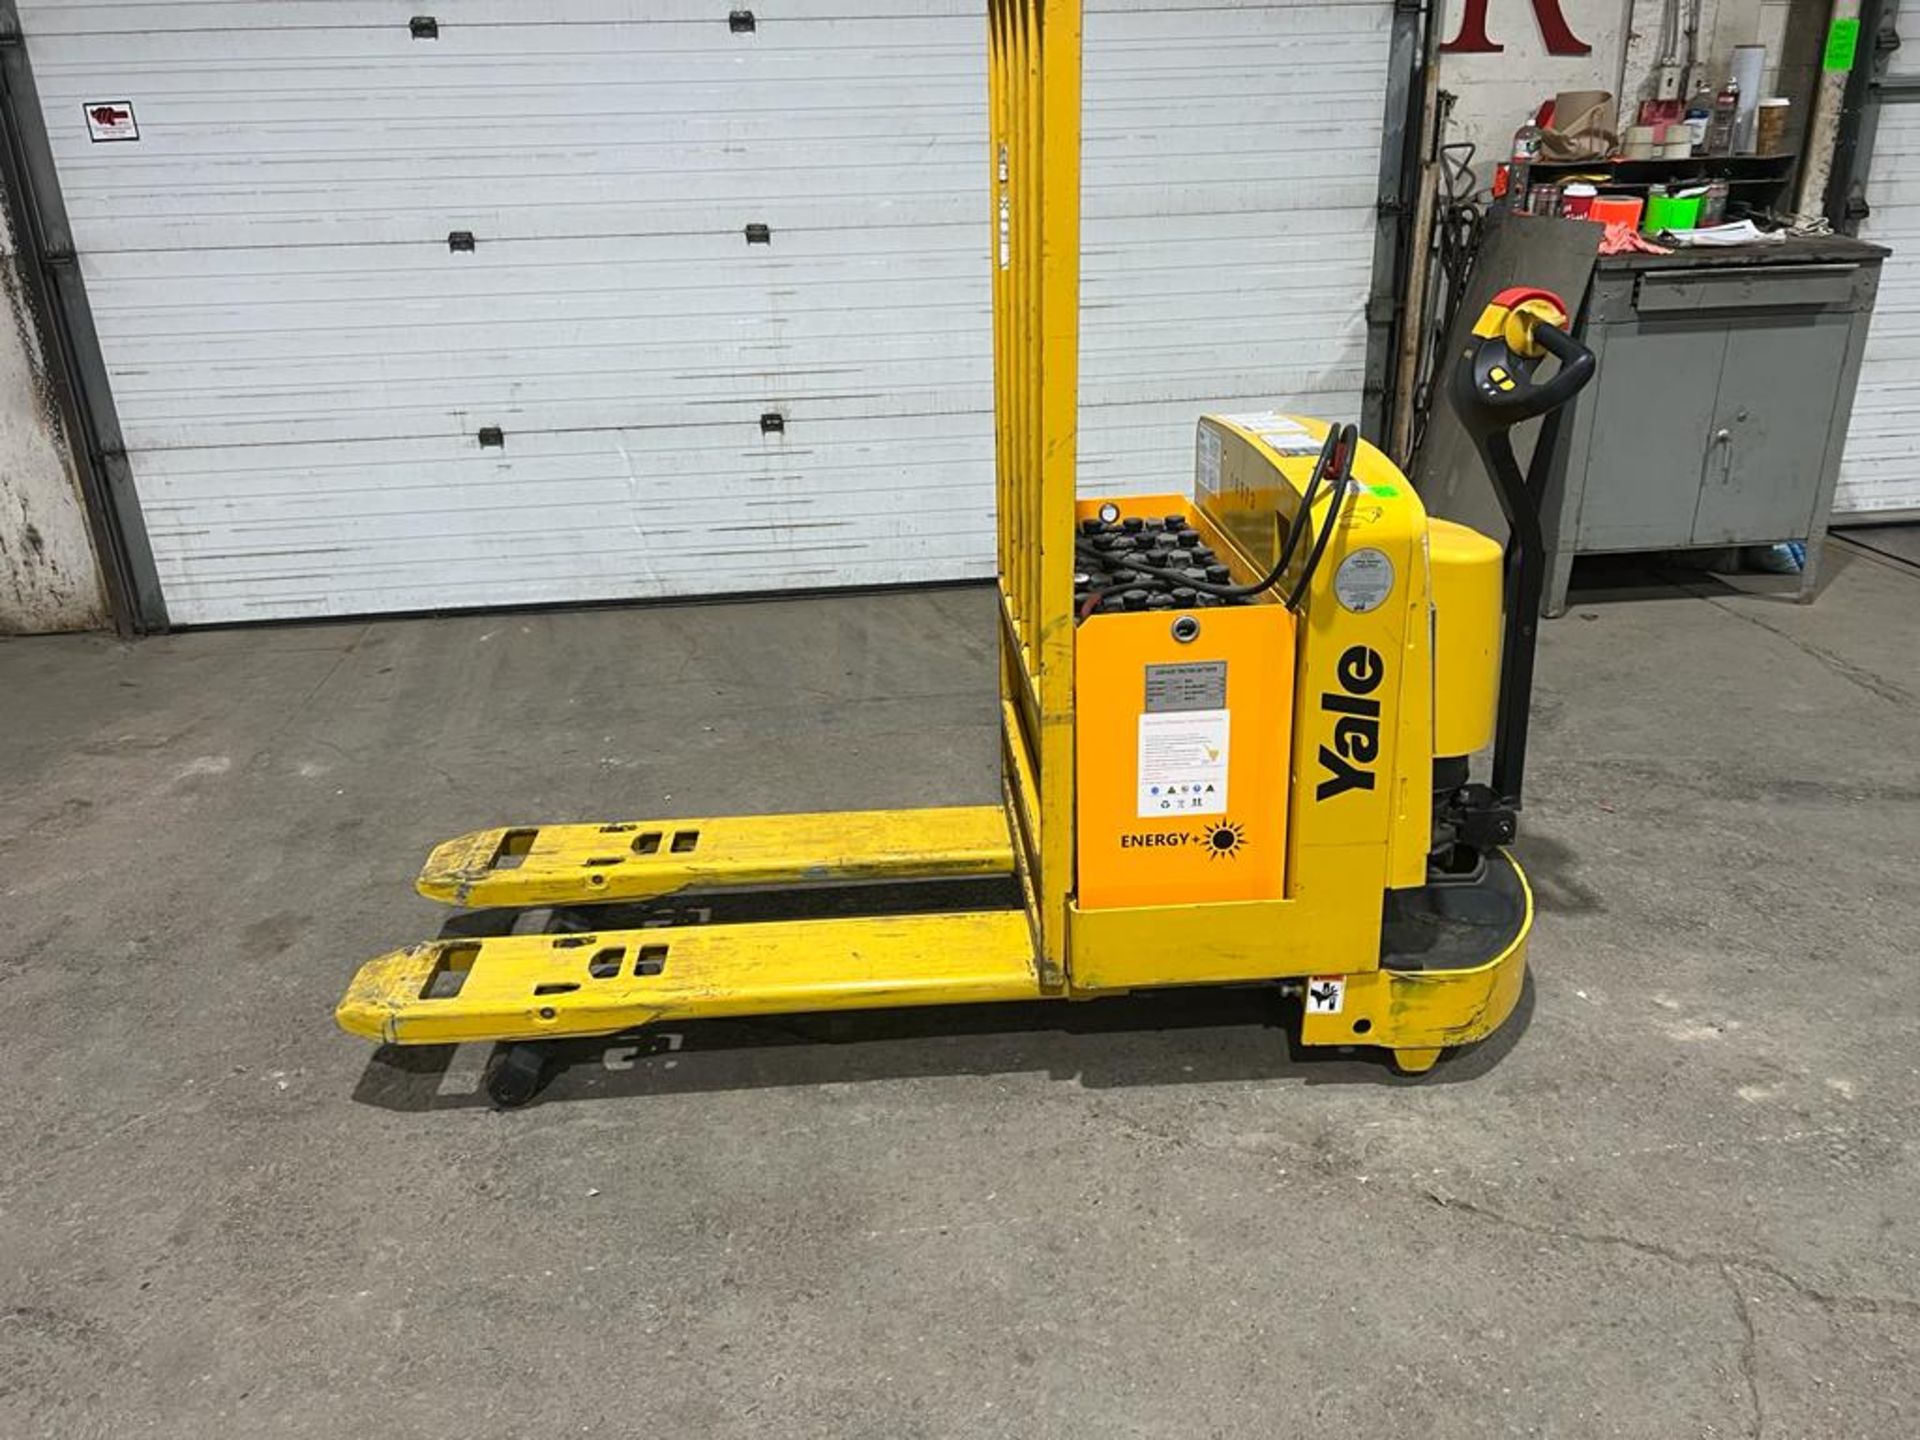 2013 Yale Walk Behind 6,000lbs capacity Electric Powered Pallet Cart NEW 24V BATTERY - VERY LOW